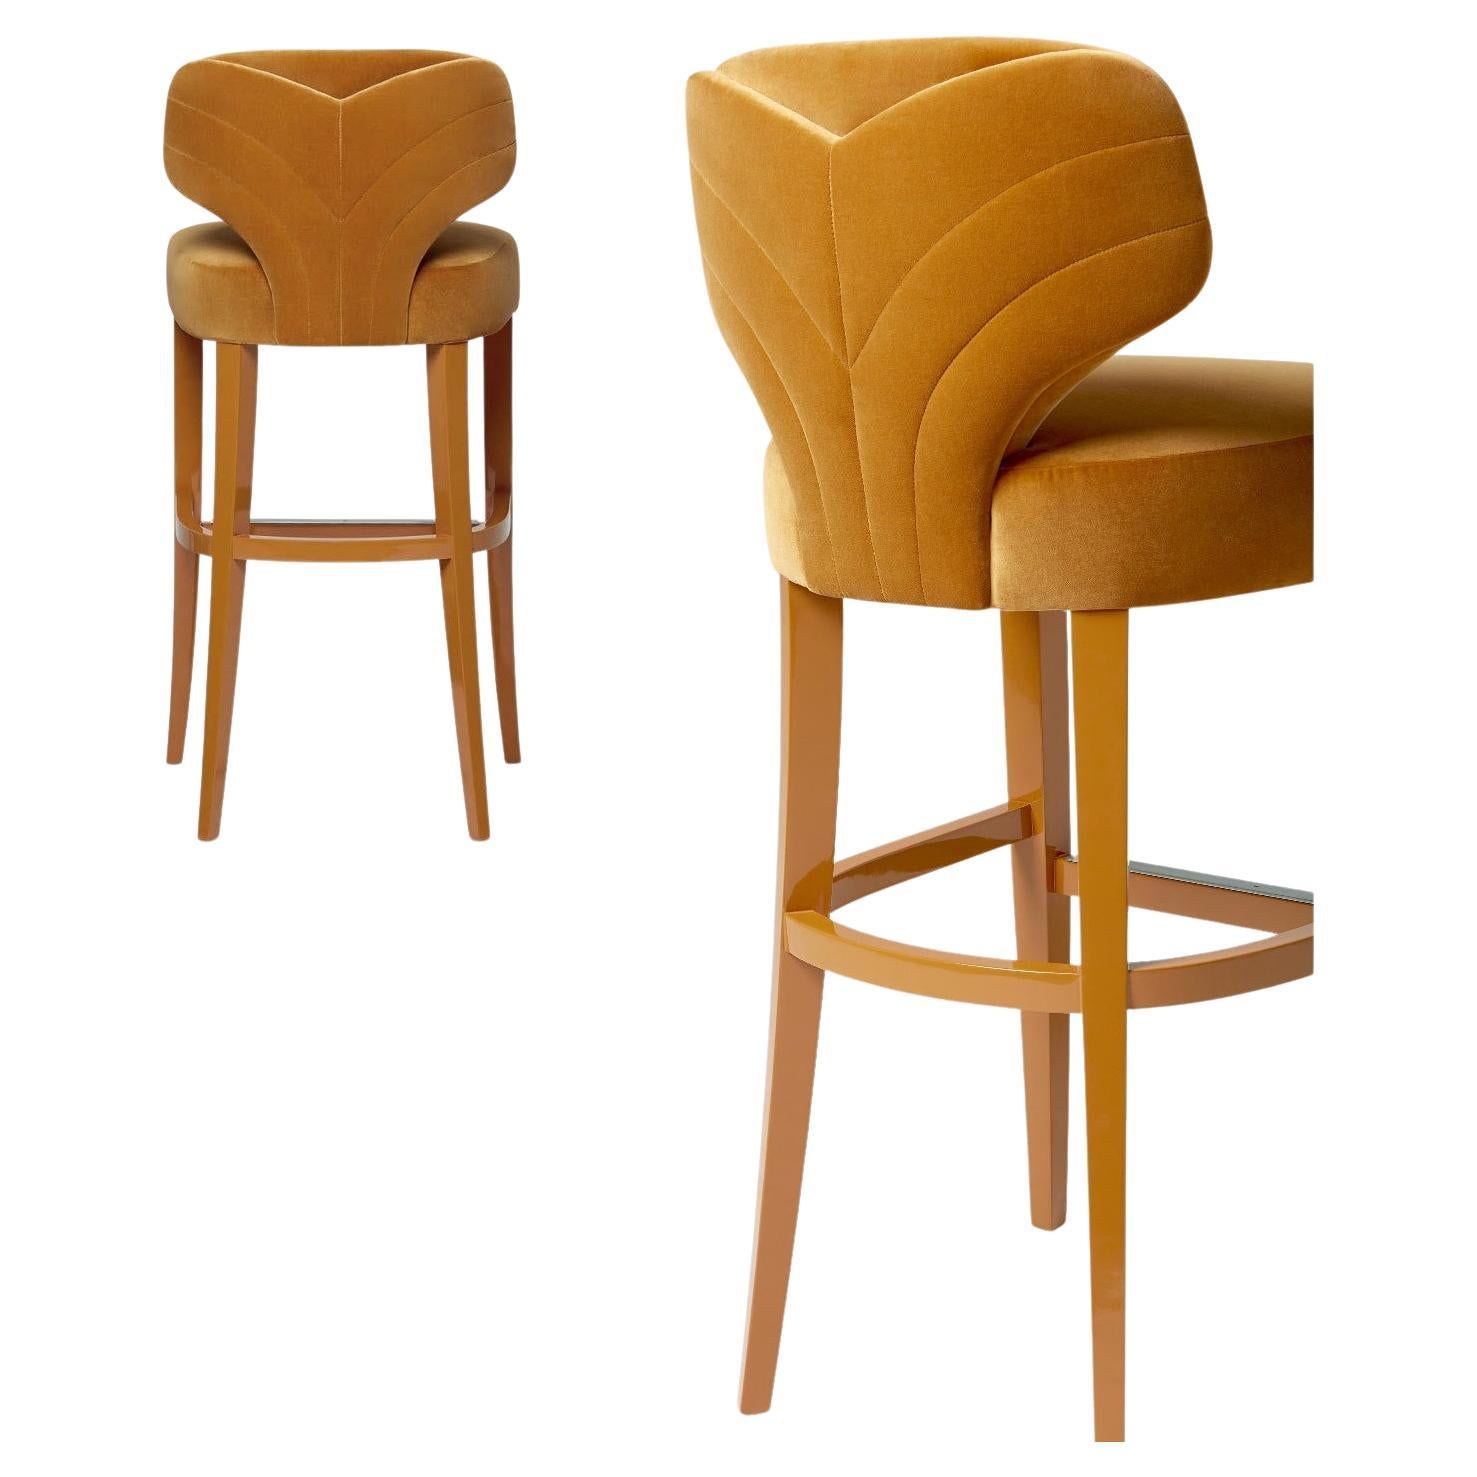 The front of this barstool is composed as a verse, with a smooth seat, backrest and legs. The scene is set for the explosion of the chorus, bursting from its quilted back, infused with detailed seaming and exuberant curved lines. The Barstool is